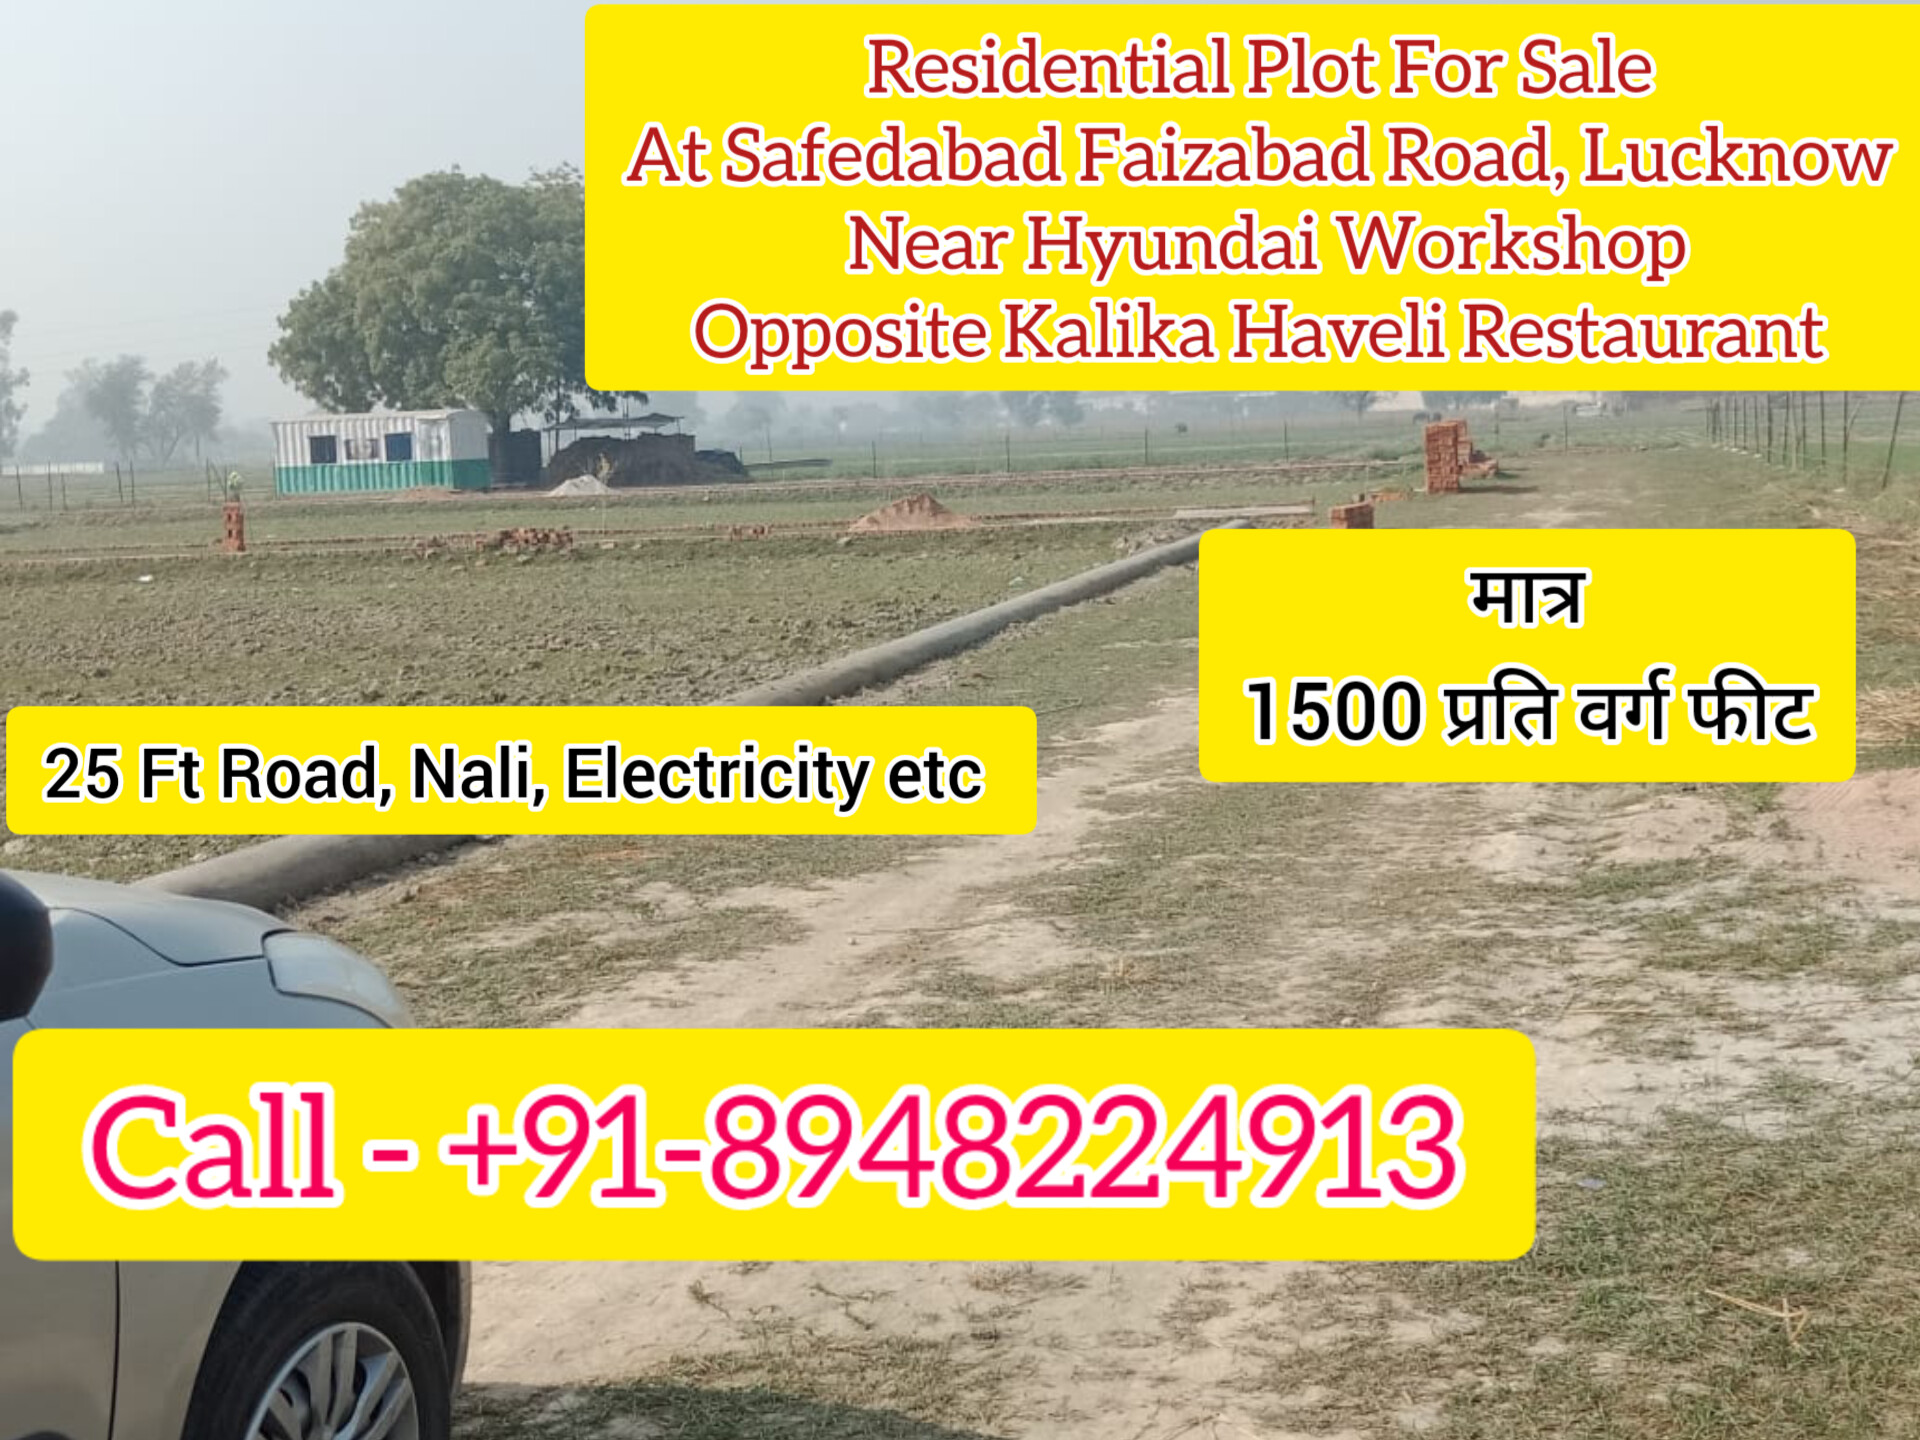 Residential Plot For Sale At Safedabad Faizabad Road Lucknow 